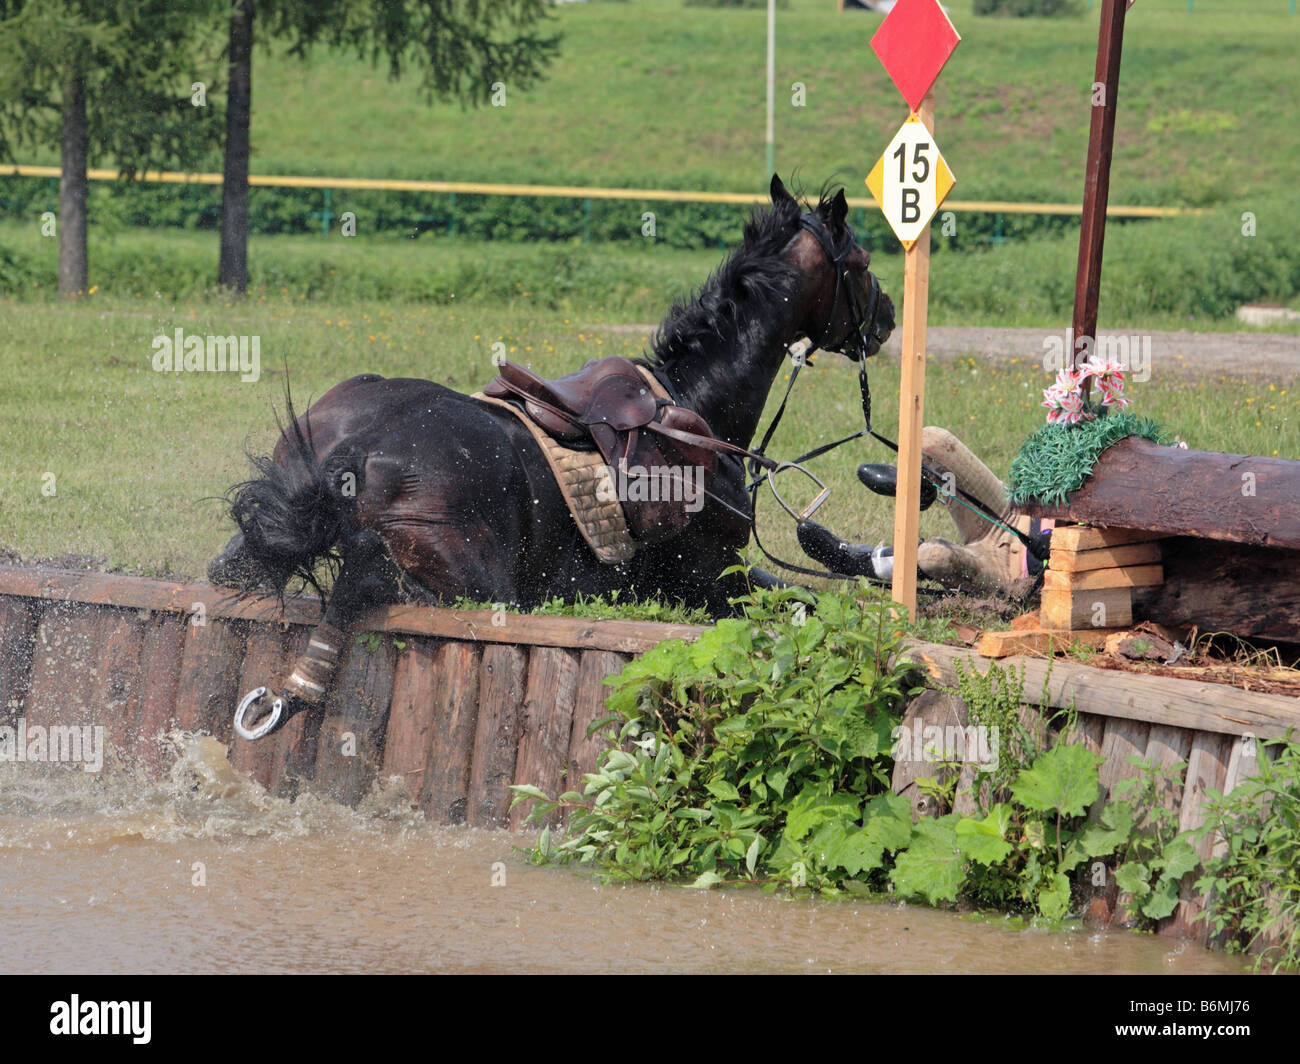 A Three Day Event Rider competing at the Moscow International horse trial Stock Photo